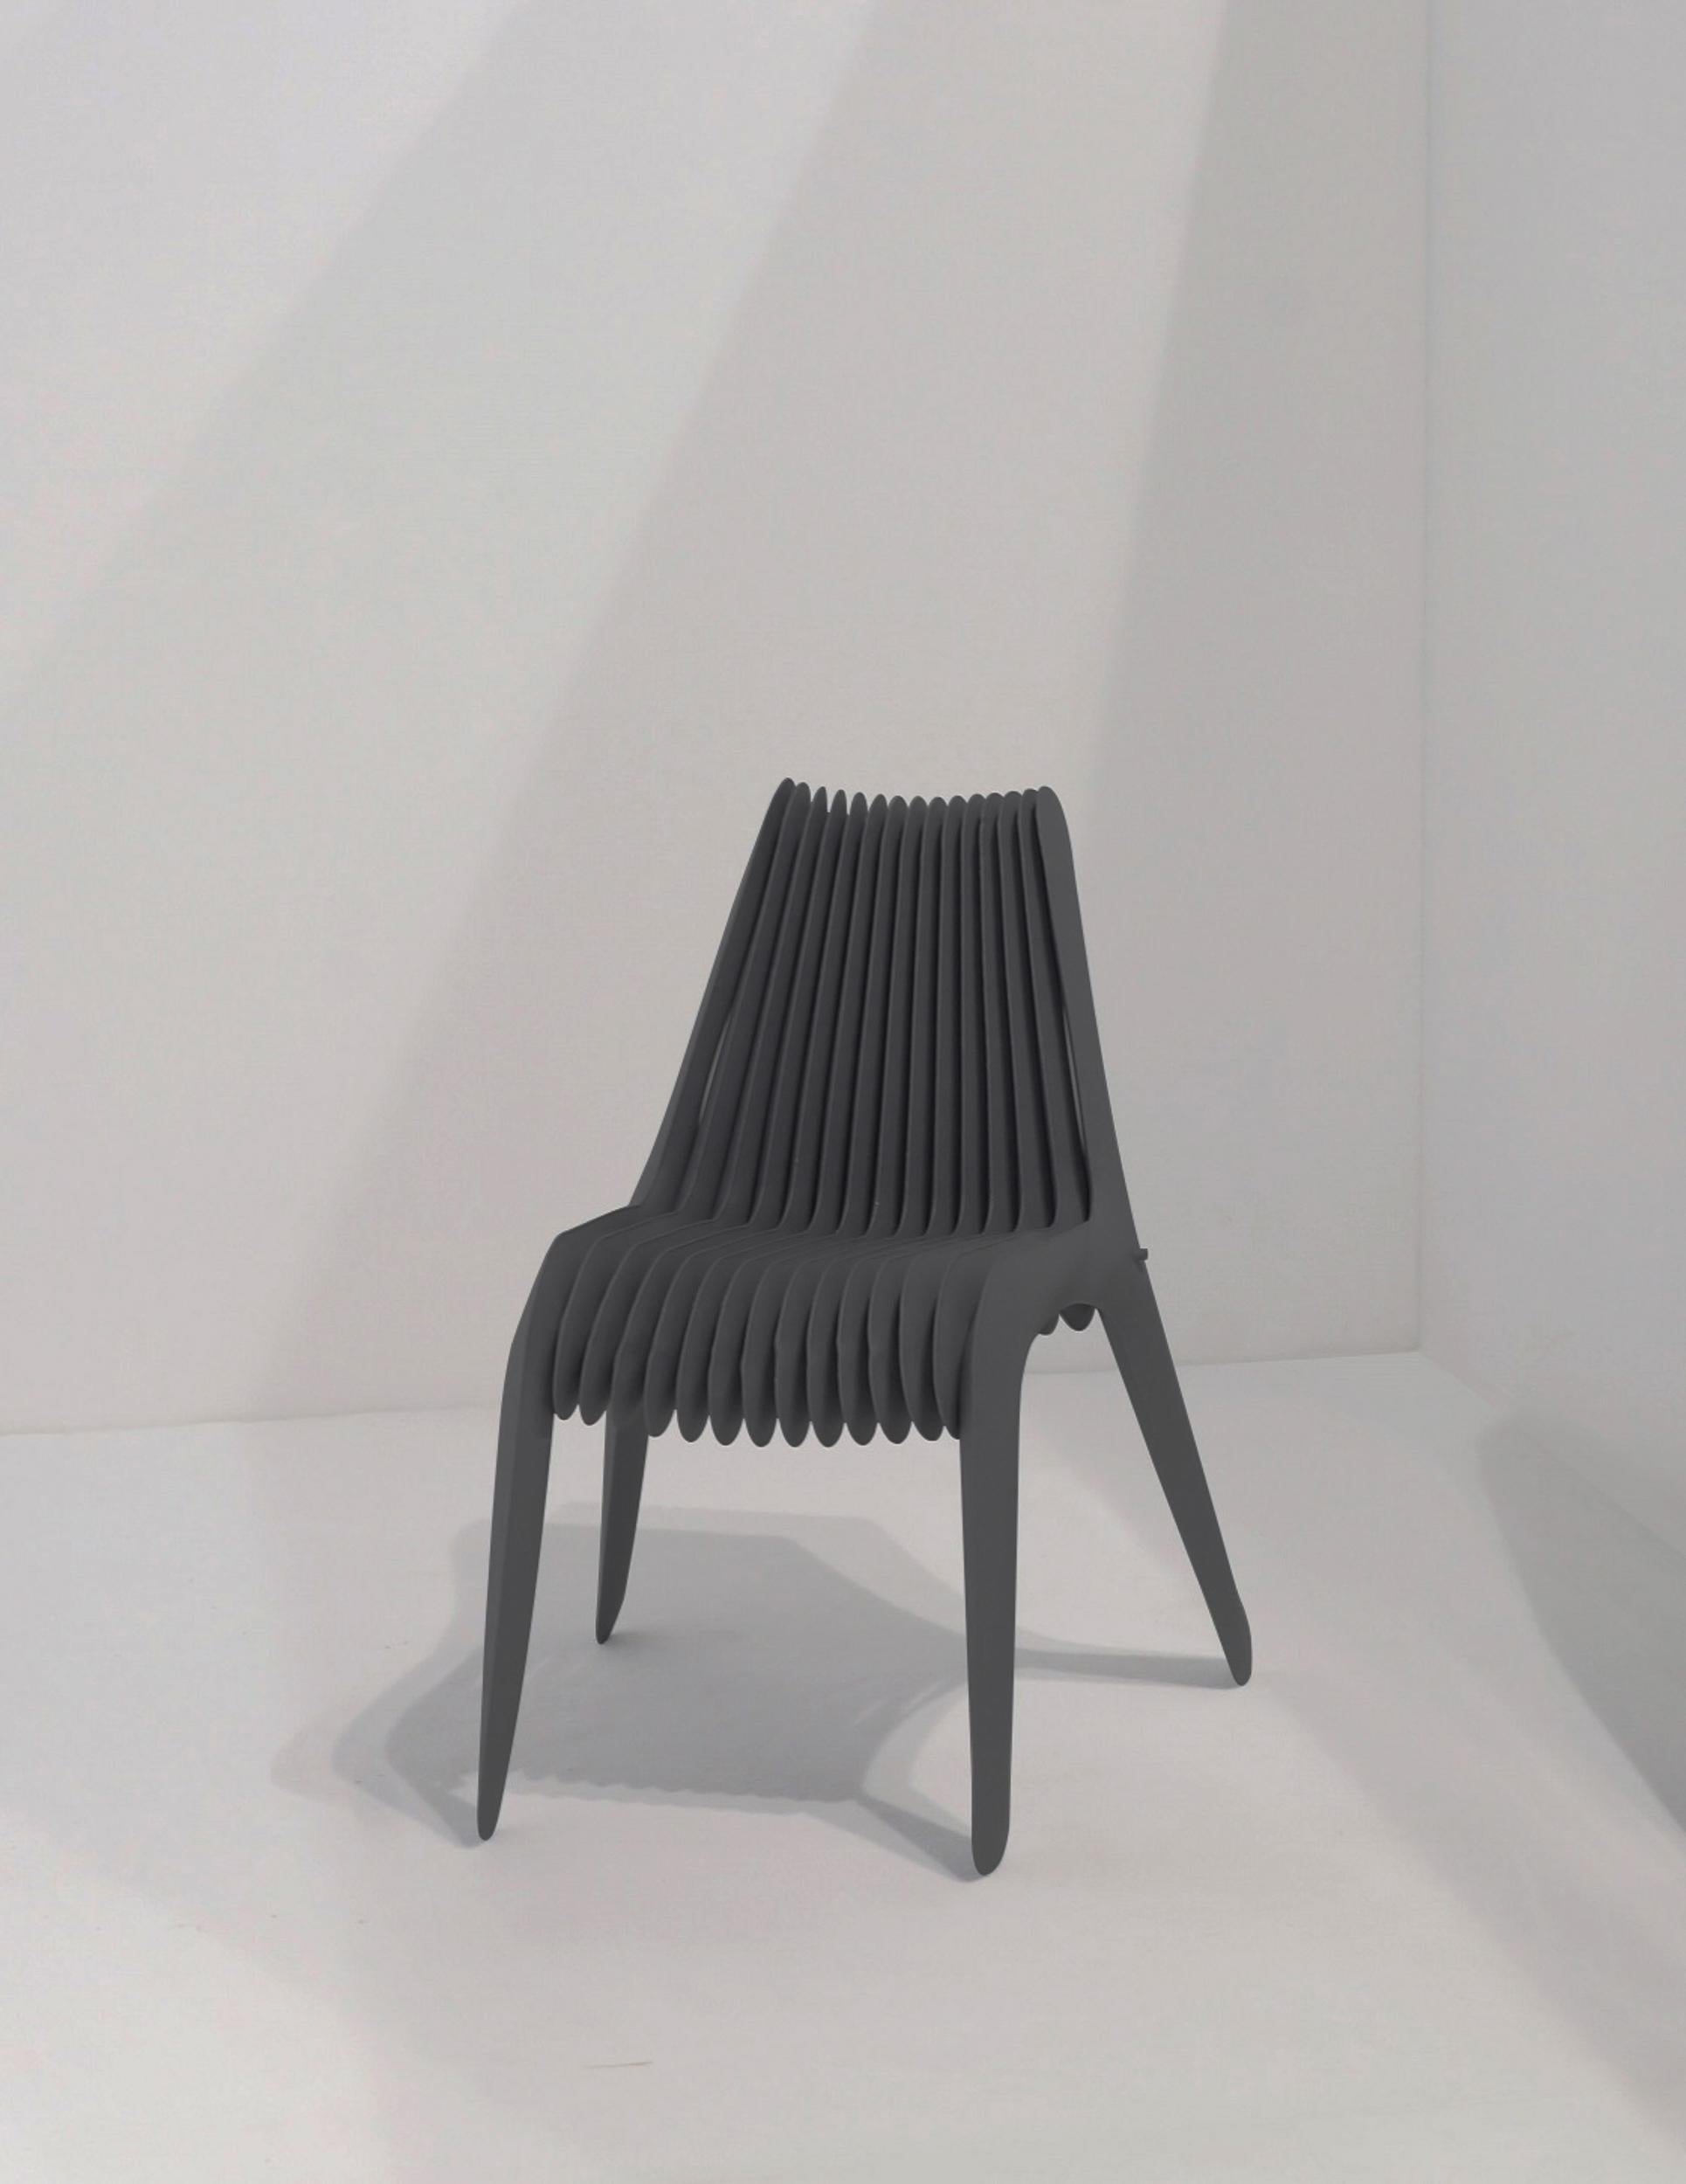 Steel In Rotation Chair by Zieta, carbon steel
Graphite Grey

Measures: 80 x 45 x 60 cm.

SIR NO. 3 CHAIR is a conceptual dialogue between design and art. Like many of Oskar Zieta’s objects, SIR chairs broaden the borders between disciplines.